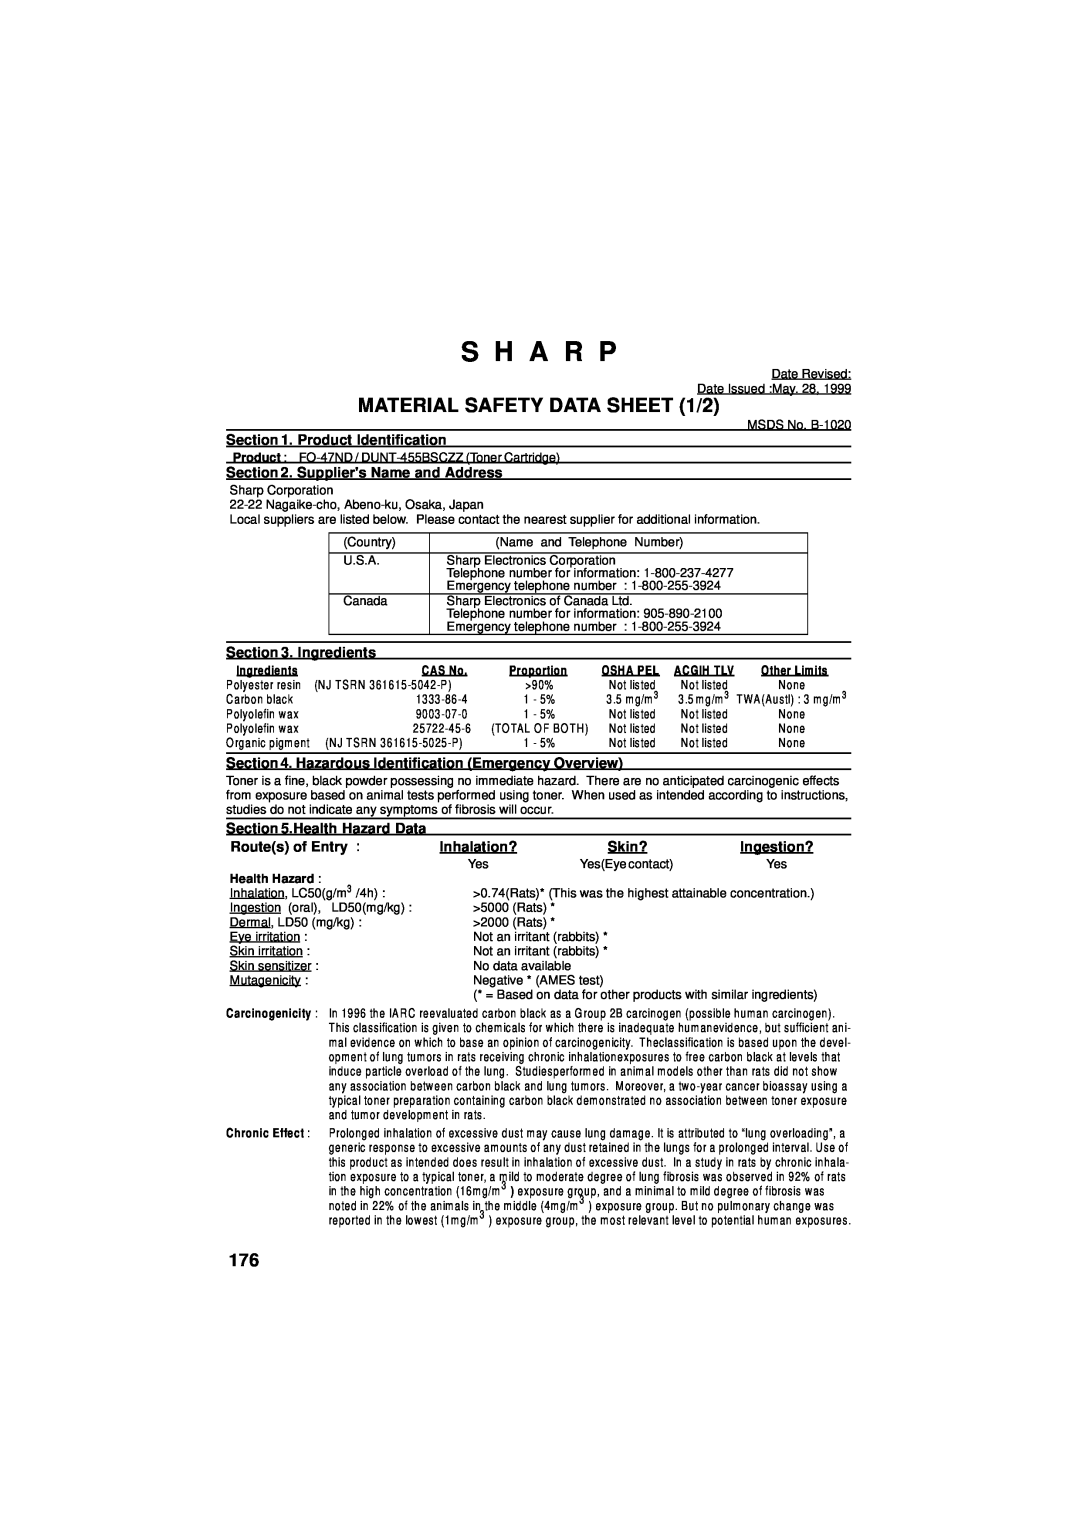 Sharp FO-4700 S H A R P, MATERIAL SAFETY DATA SHEET 1/2, Product Identification, Suppliers Name and Address, Ingredients 